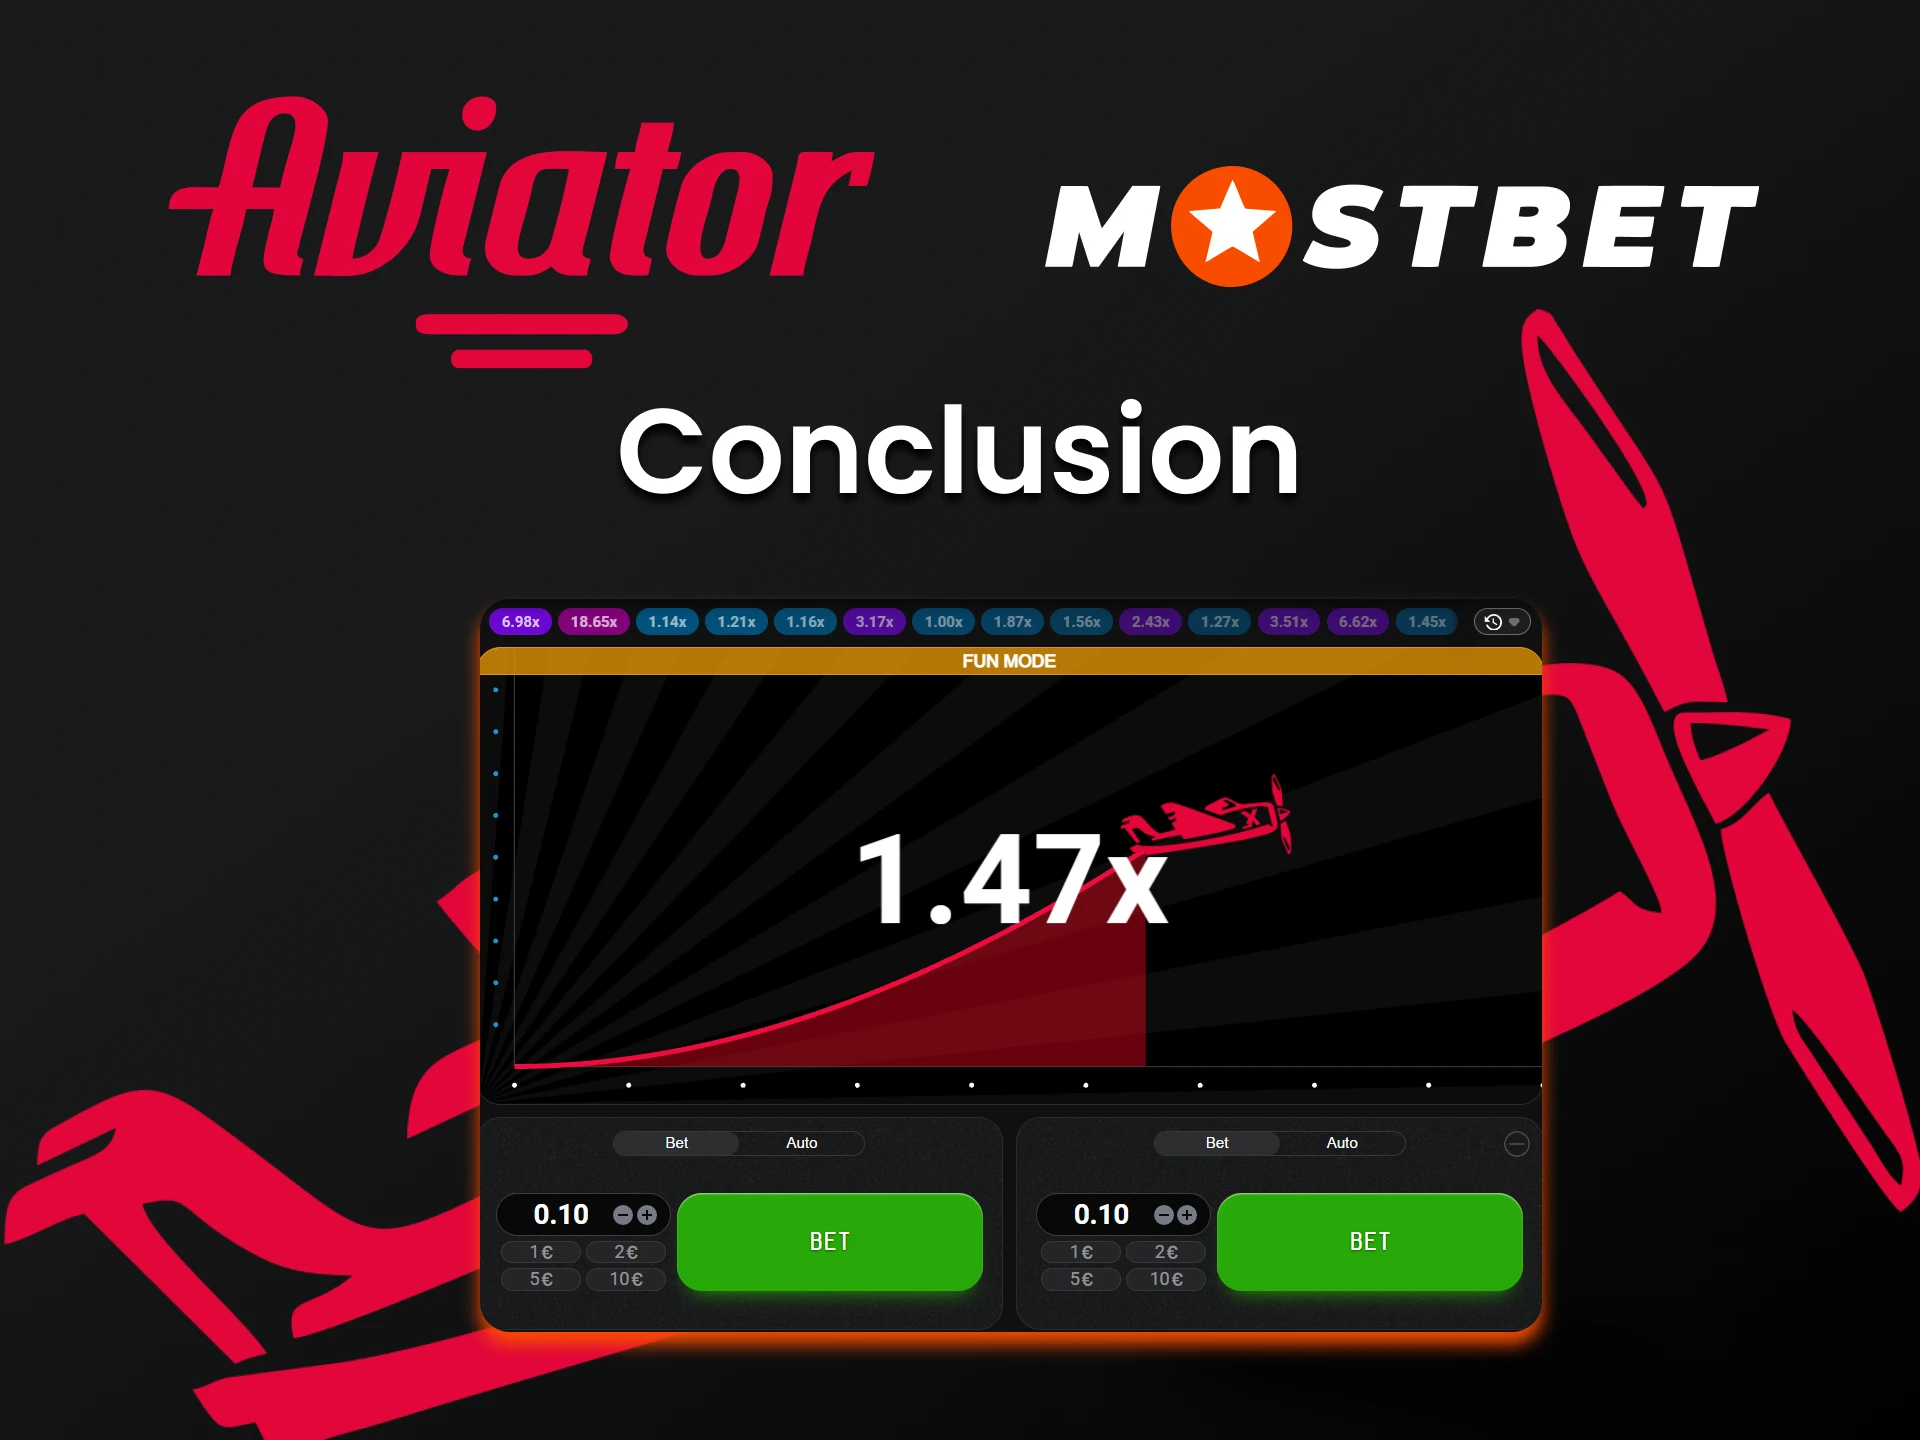 Choose Mostbet to play Aviator.